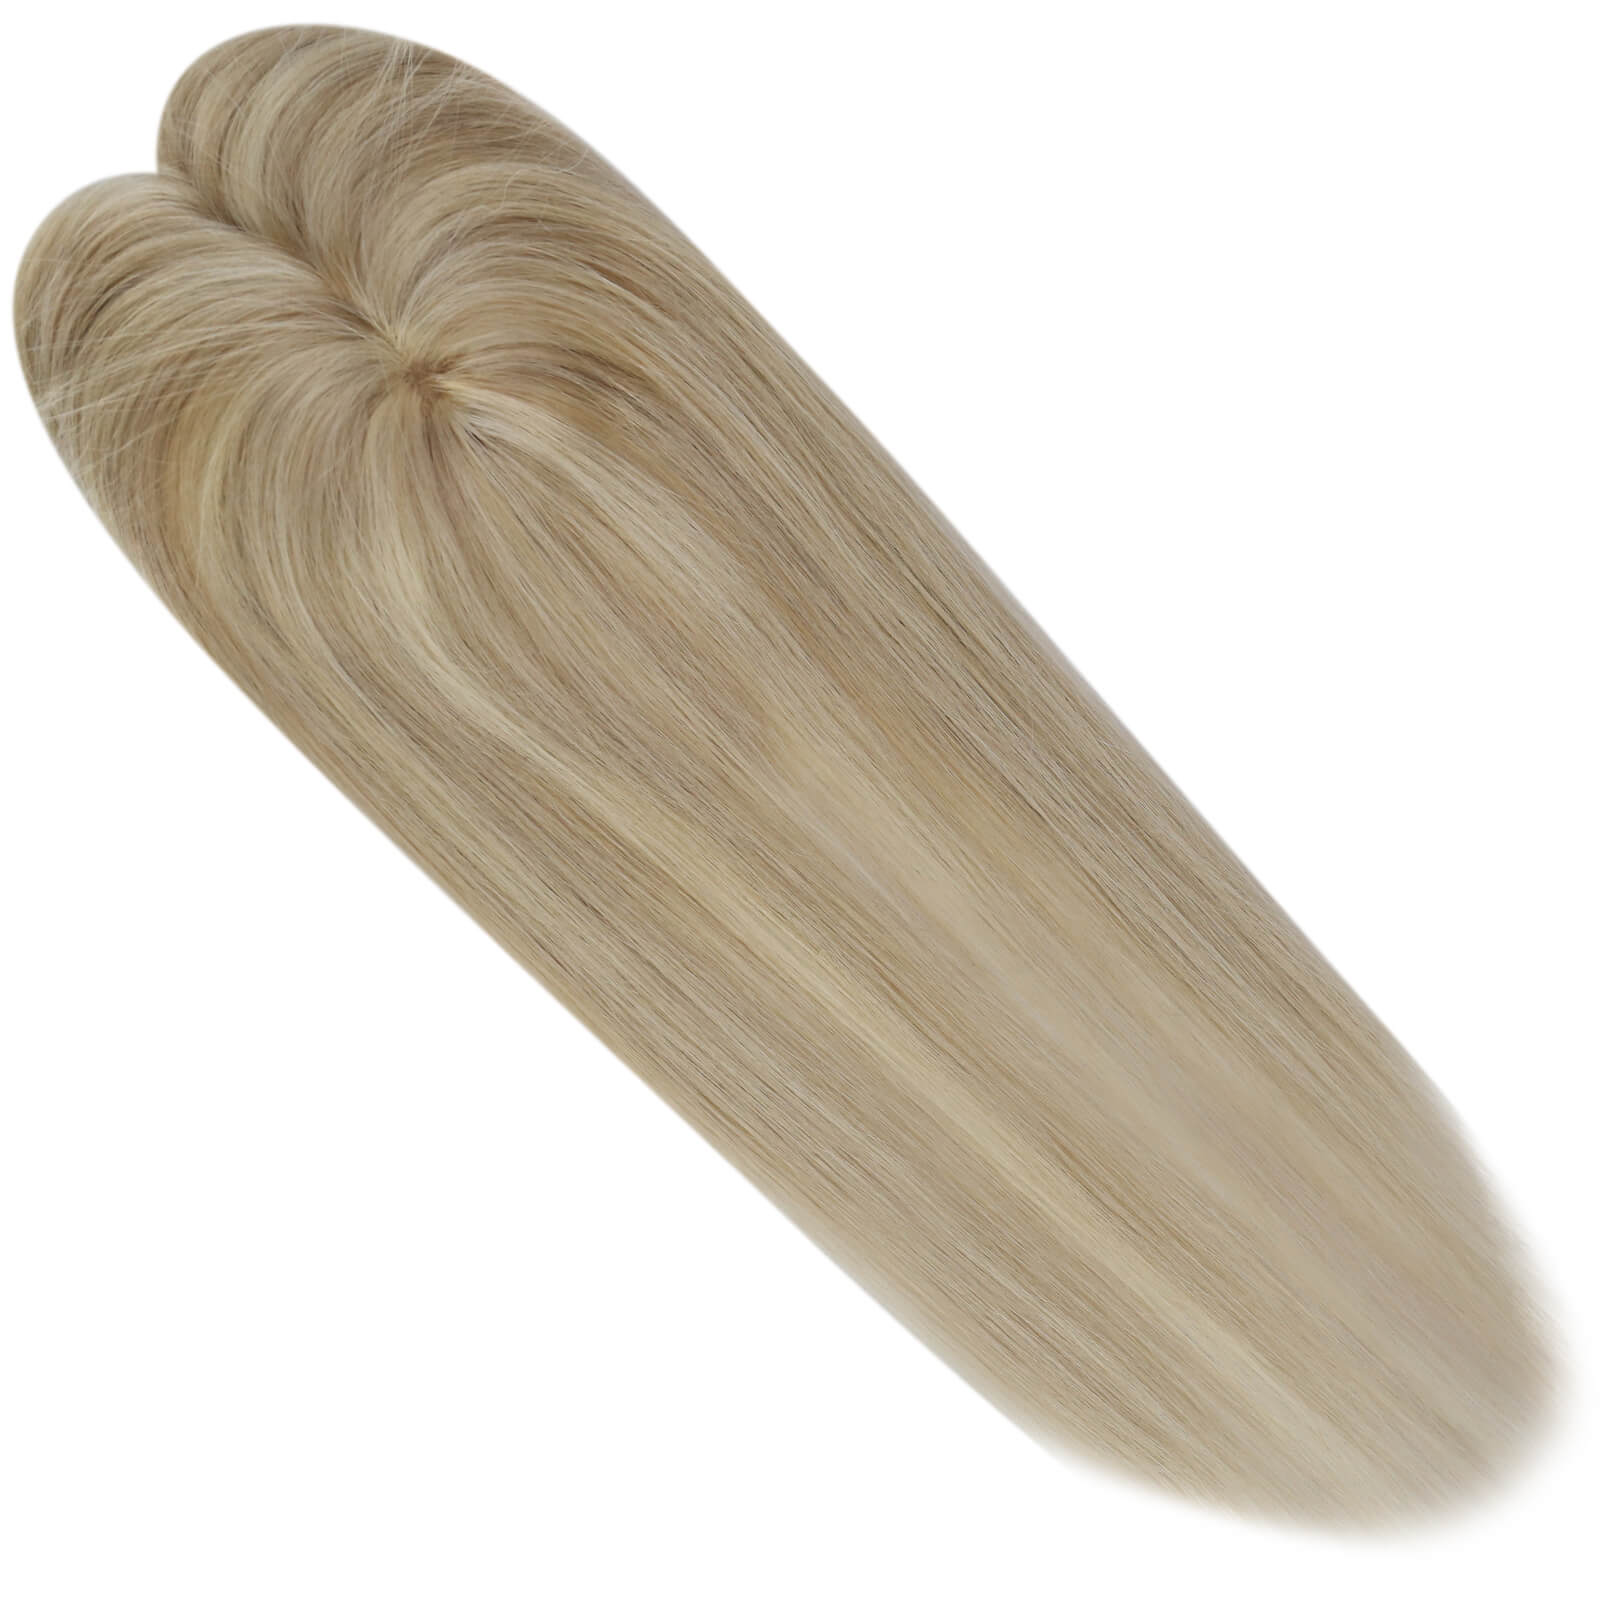 Topper Hair Pieces Remy Hair For Women Highlight Blonde #P18/613-3*5 inch |Youngsee